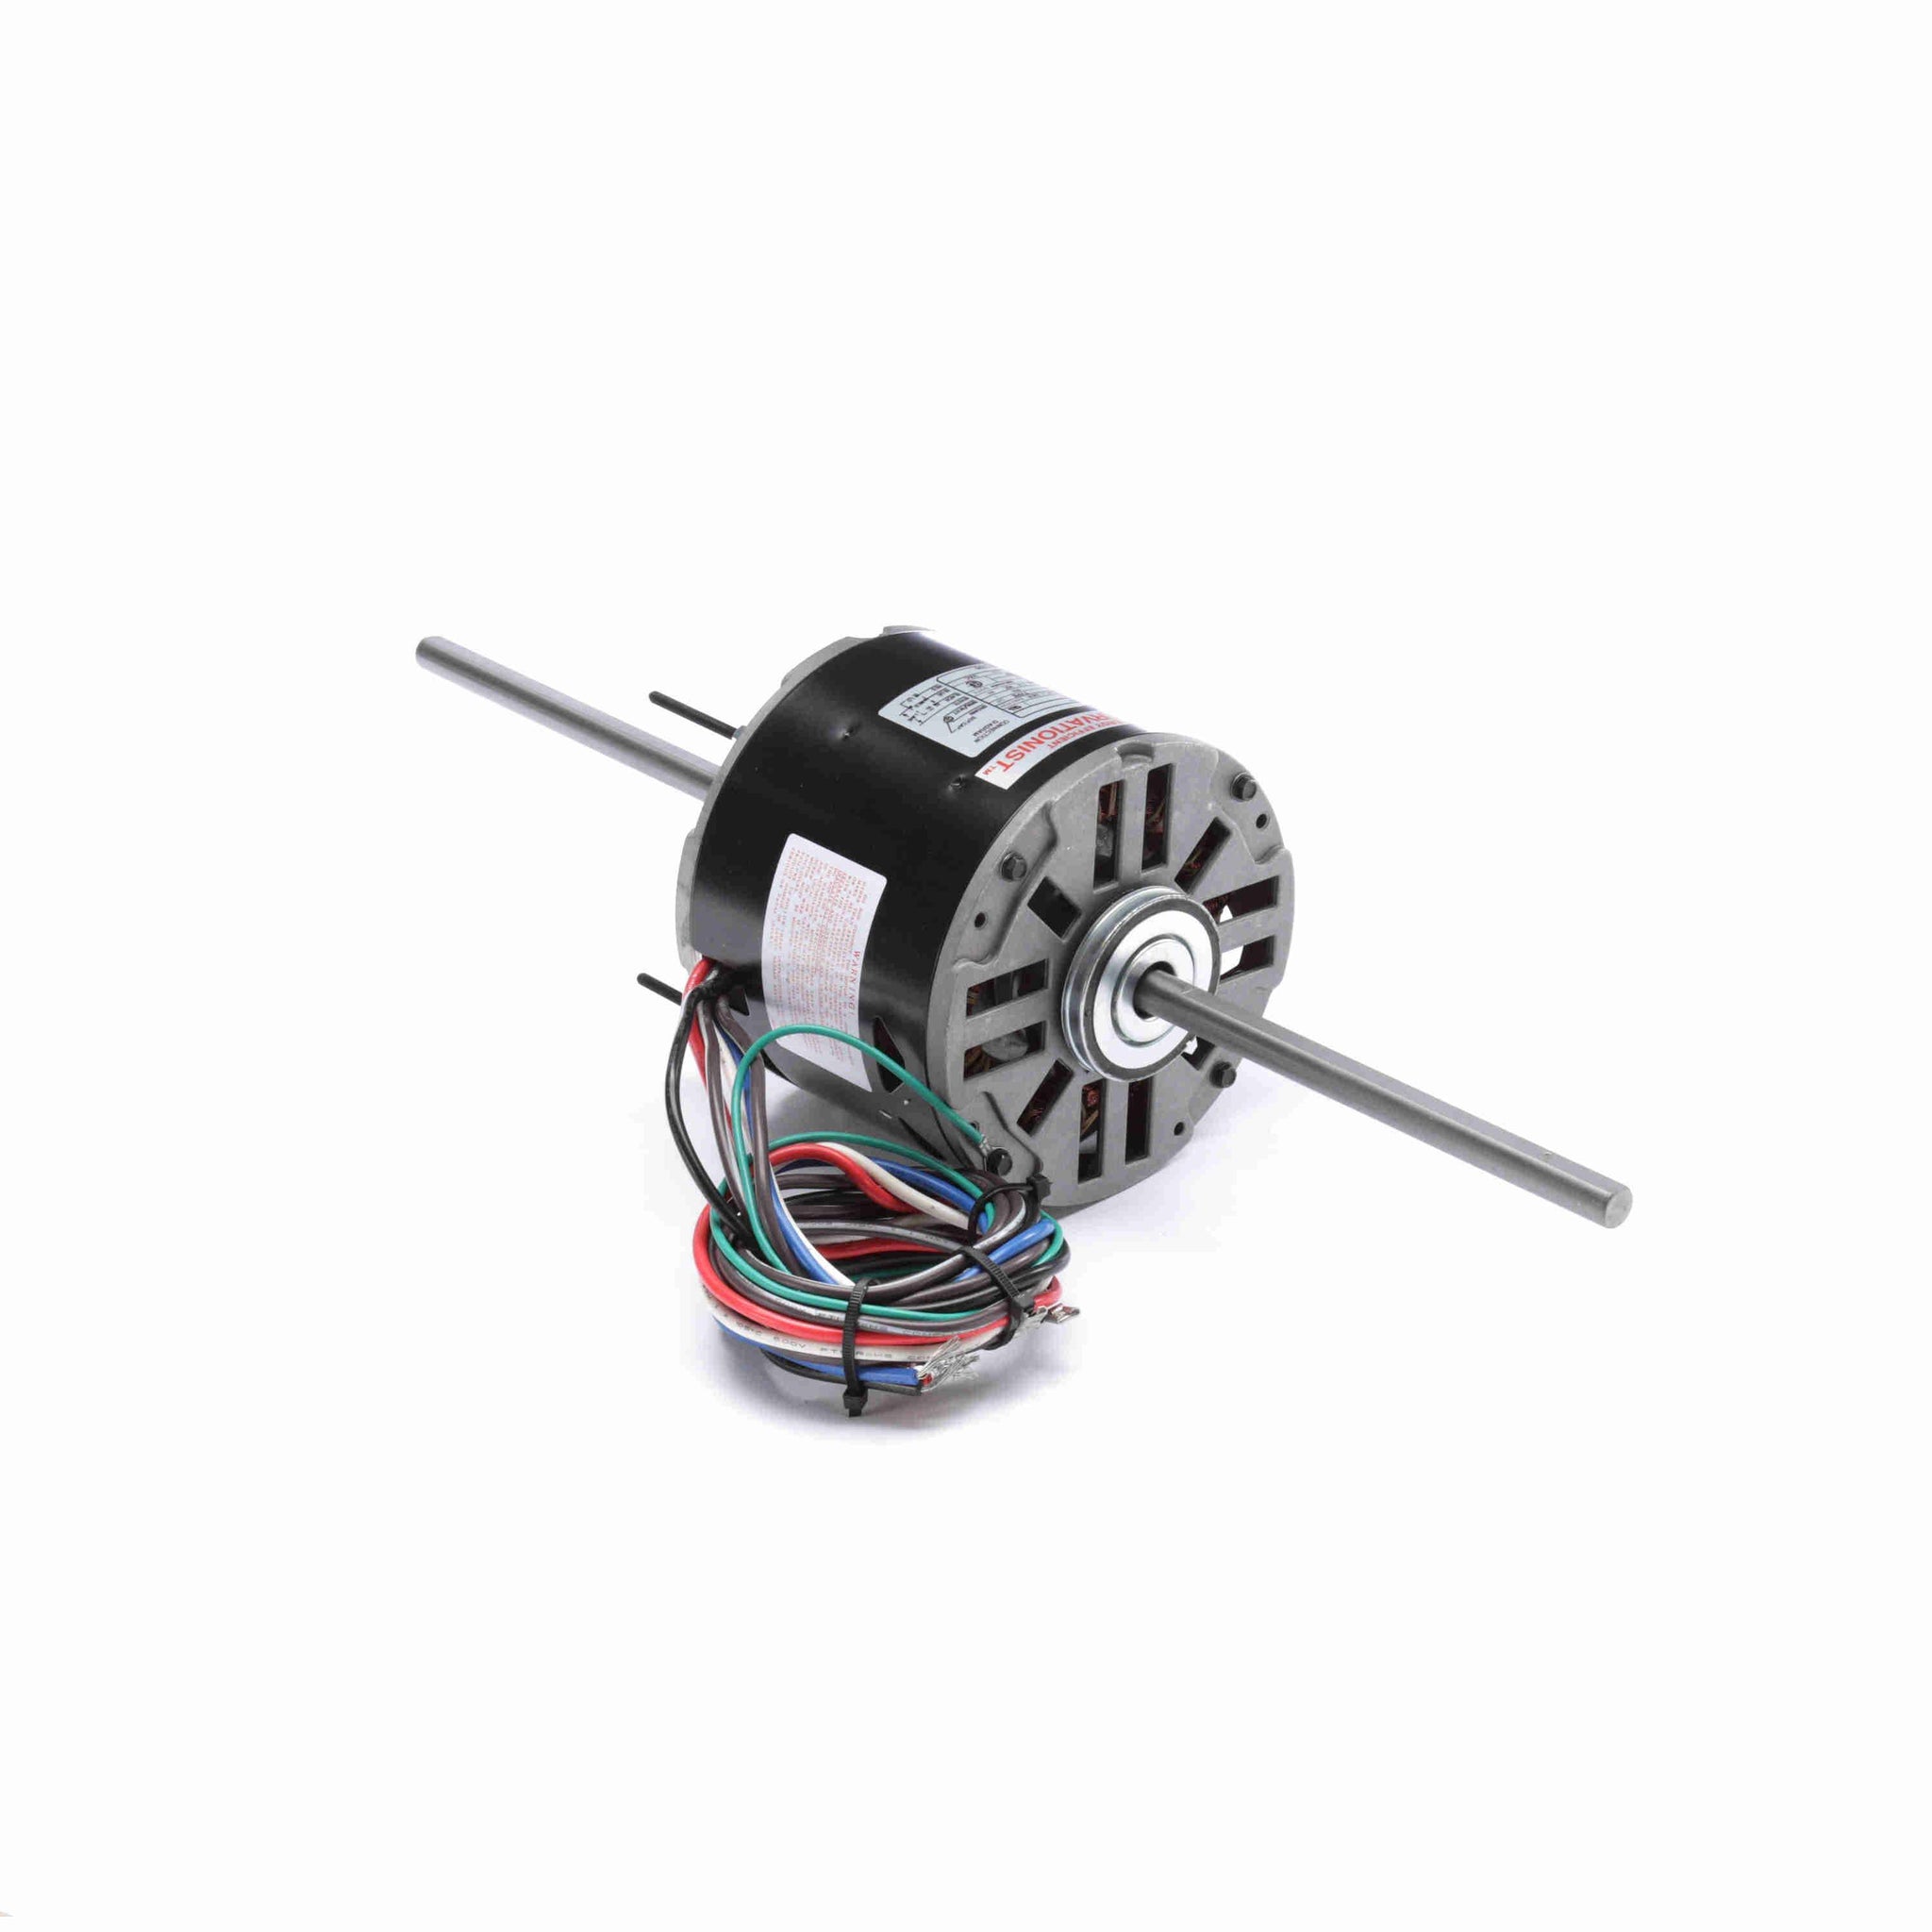 RA1036 - 1/3 HP Fan Coil / Room Air Conditioner Motor, 1075 RPM, 3 Speed, 208-230 Volts, 48 Frame, Semi Enclosed - Hardware & Moreee